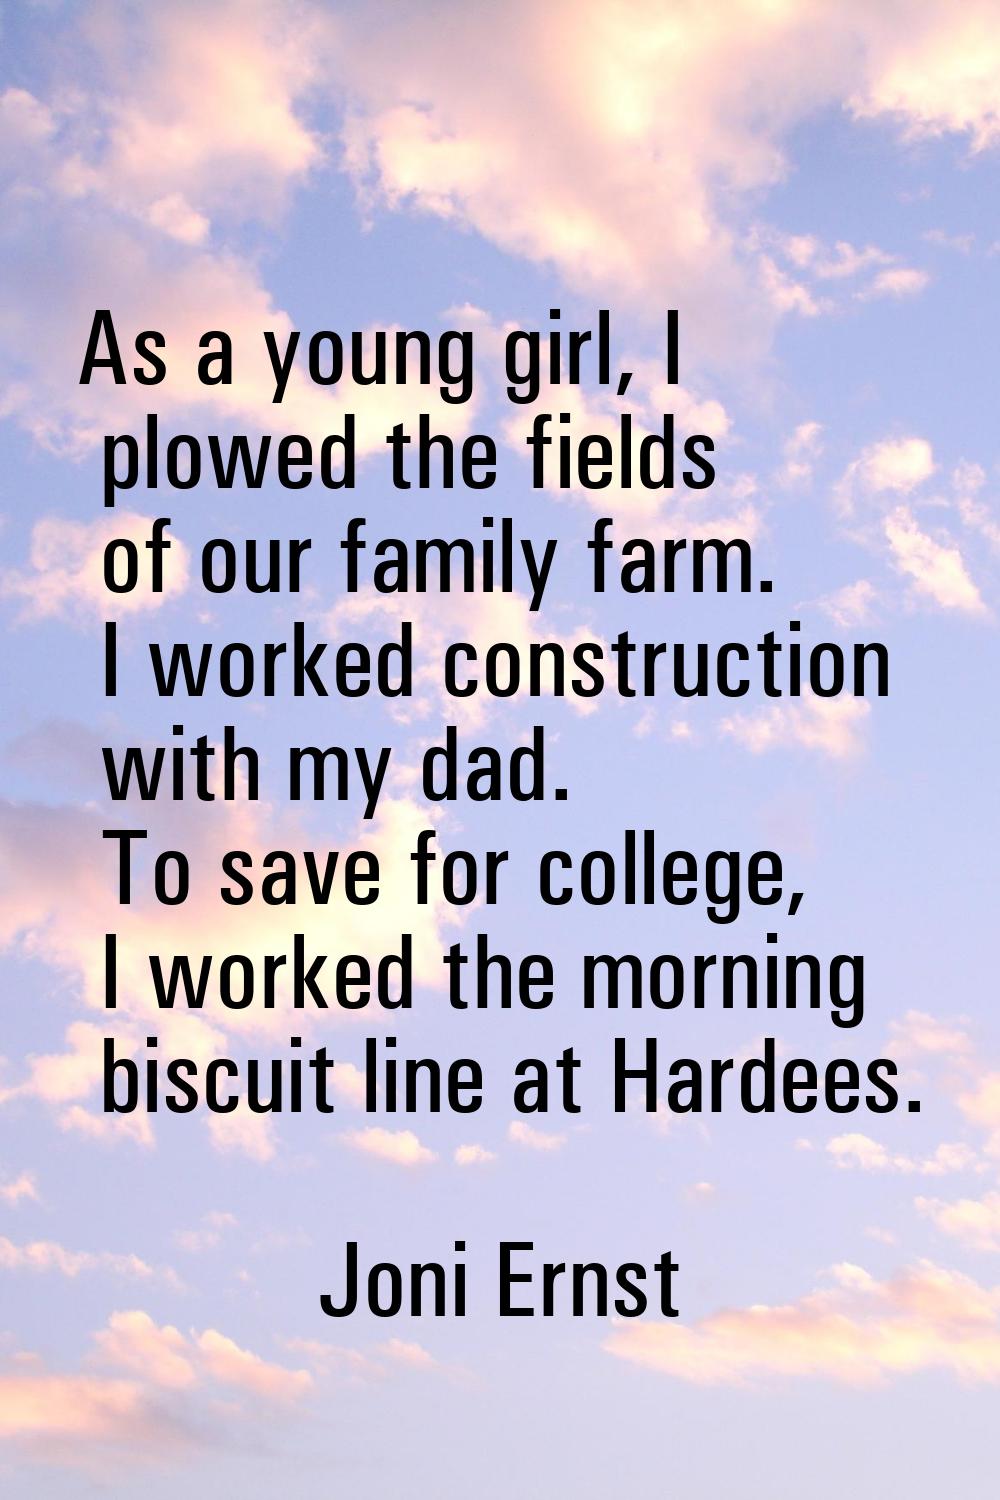 As a young girl, I plowed the fields of our family farm. I worked construction with my dad. To save